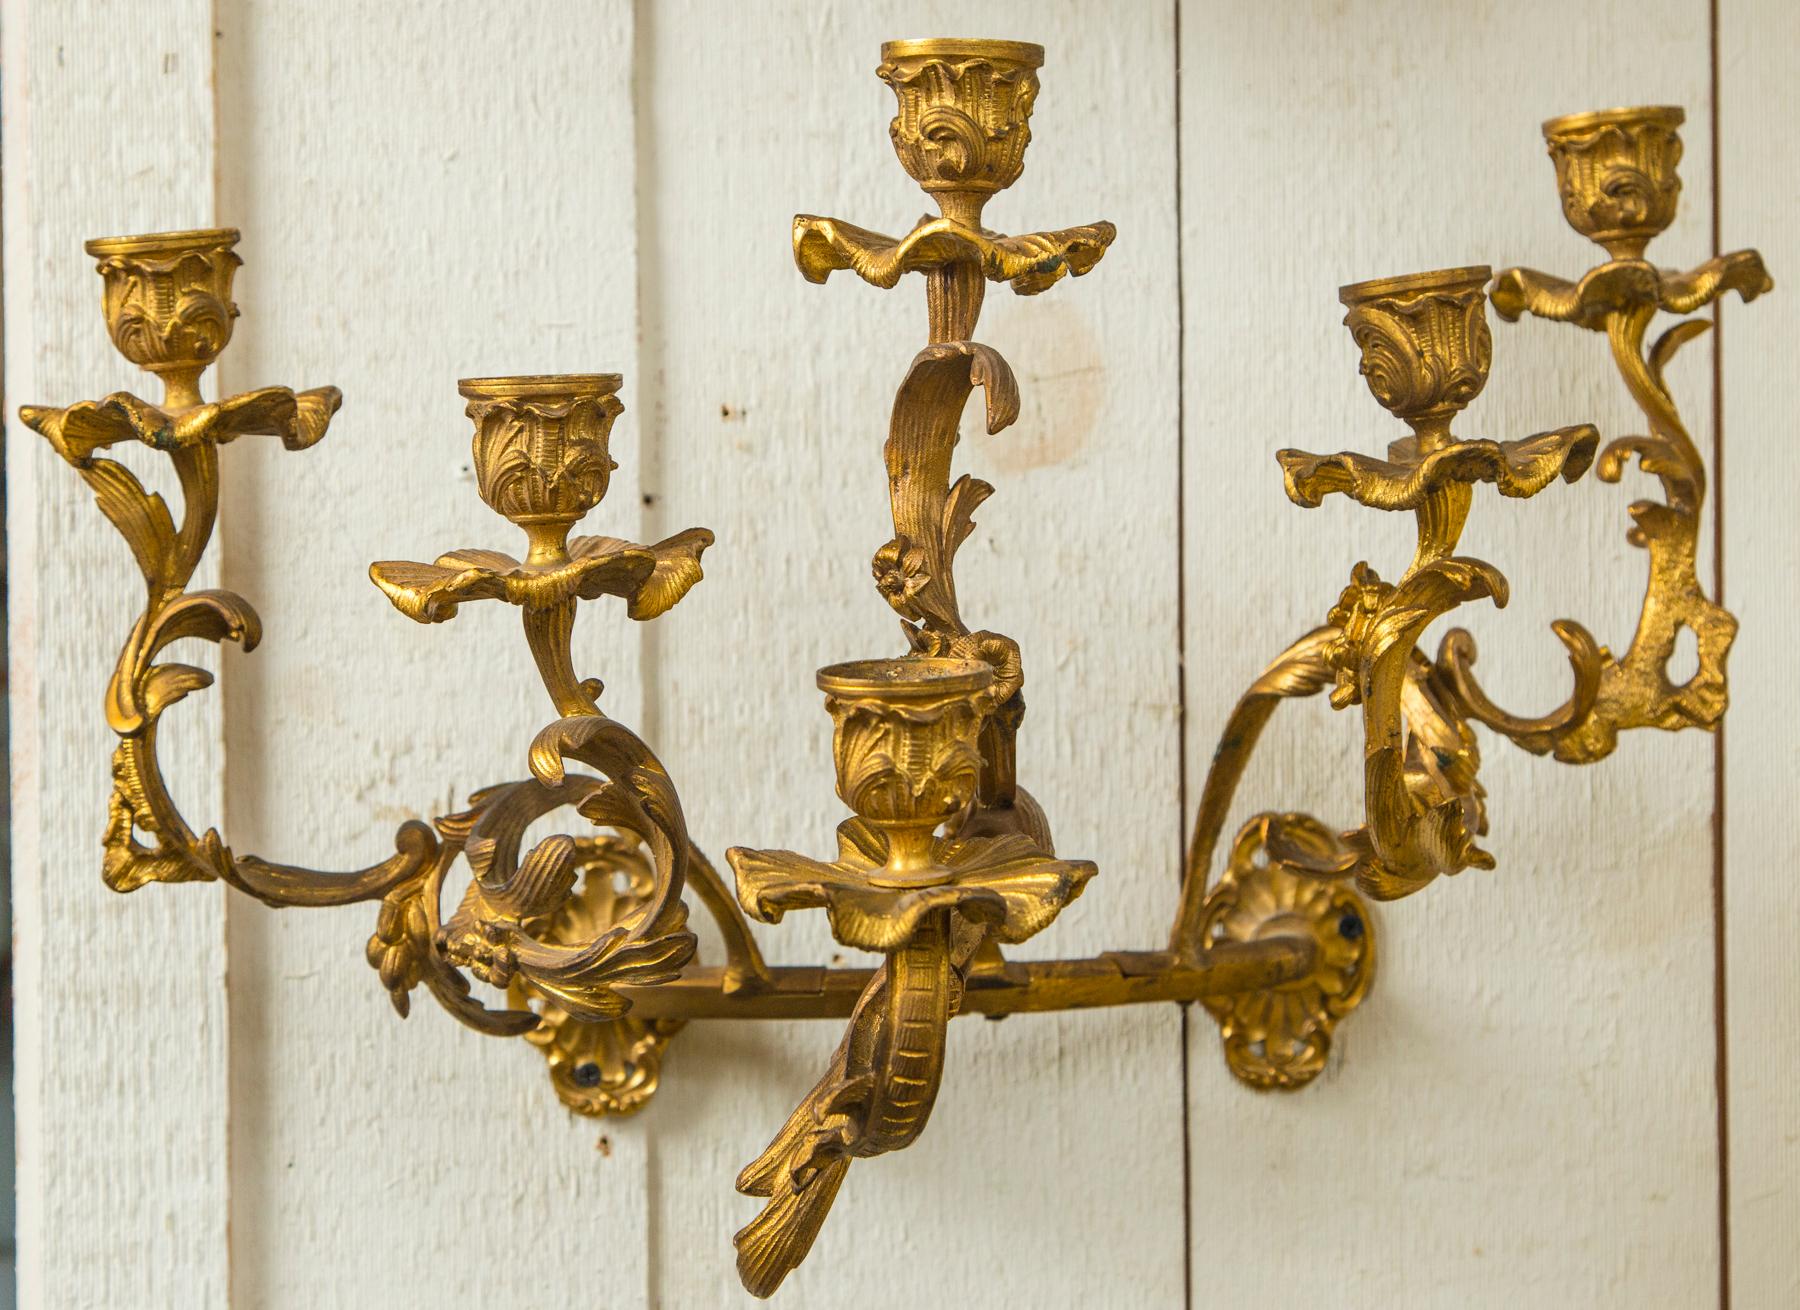 This pair of sconces are of an unusual half round or crescent form. Gilt bronze sconces, with graduated height arms and candle cups topped by single candle arm.
In the Rococo manner. 
Not electrified.